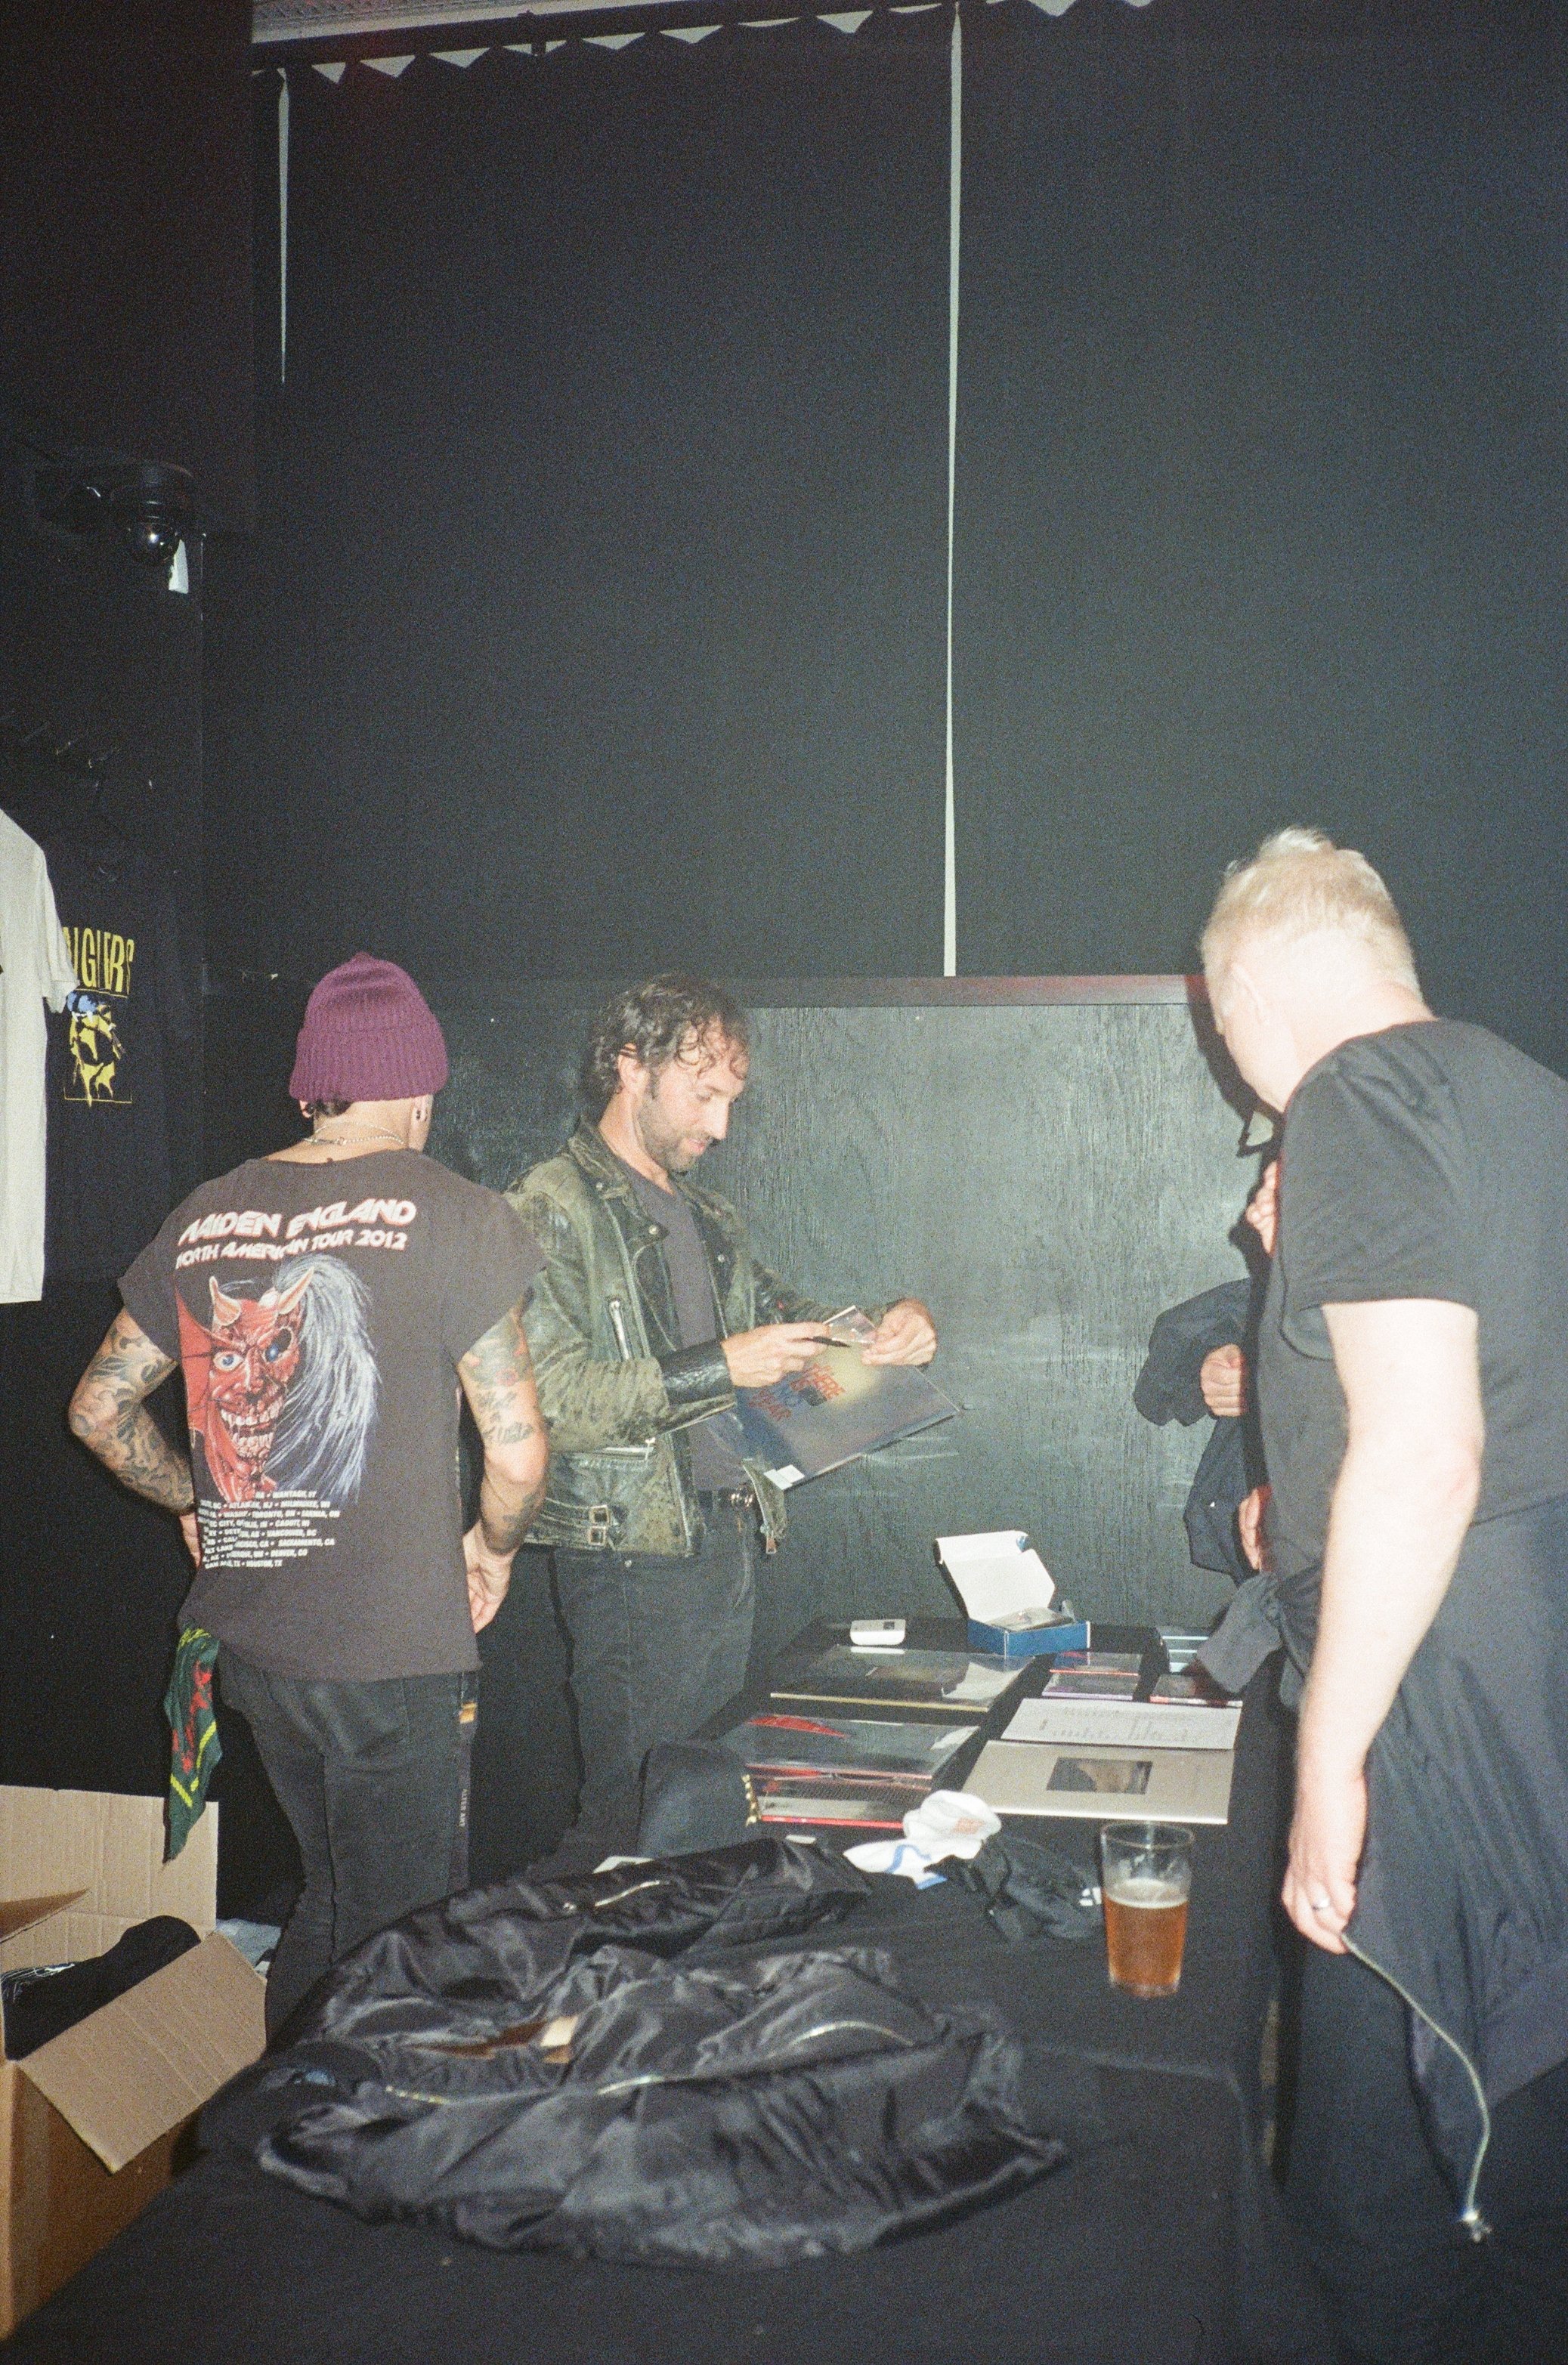 Tristan and Lee at merch stand, Slaktkyrkan